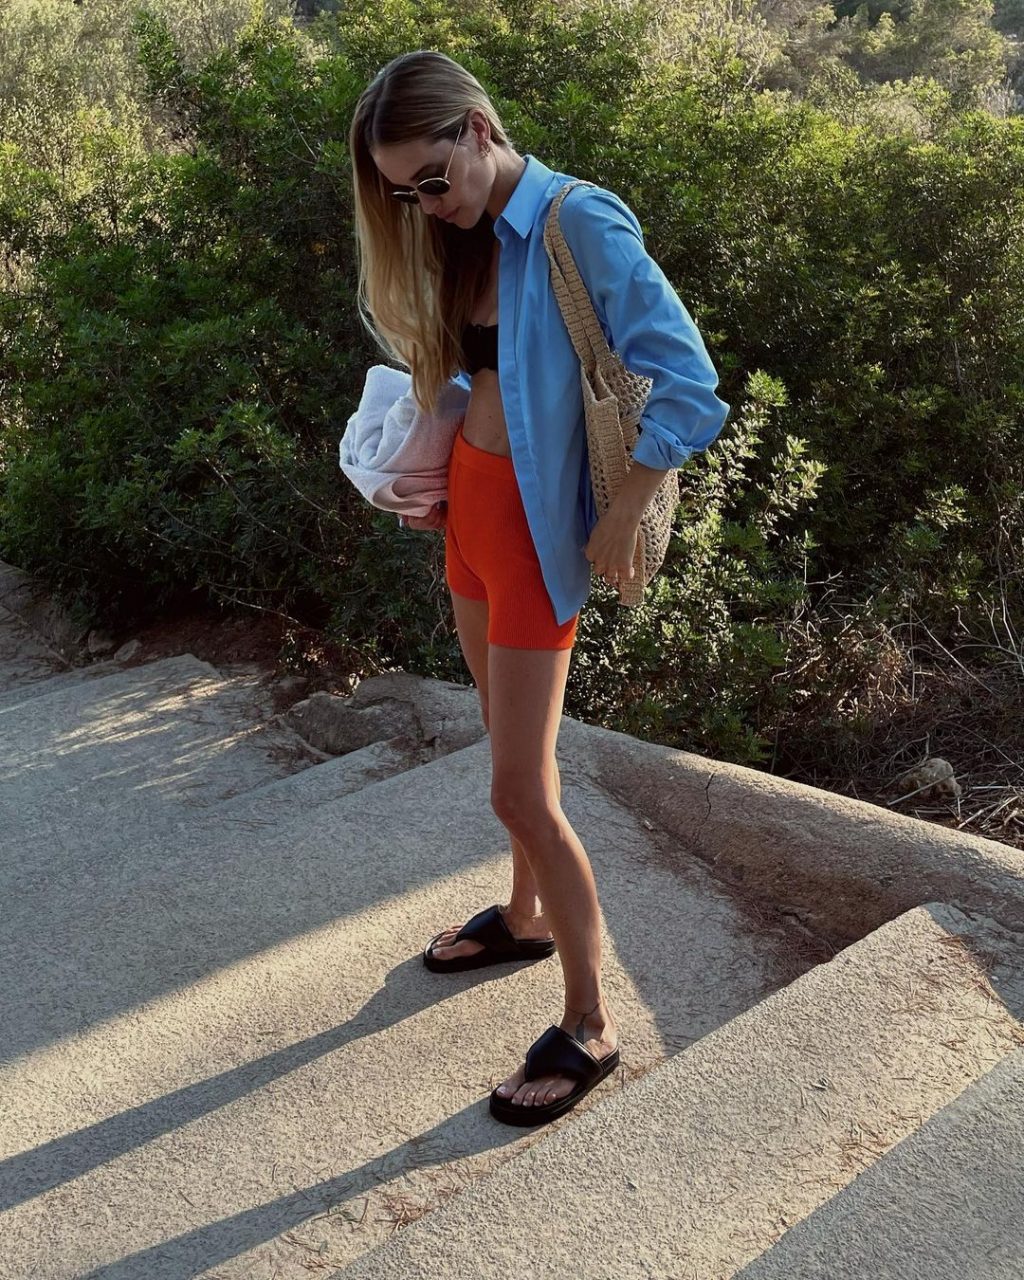 Welcoming summer with 5 stylish shorts designs from home to the street